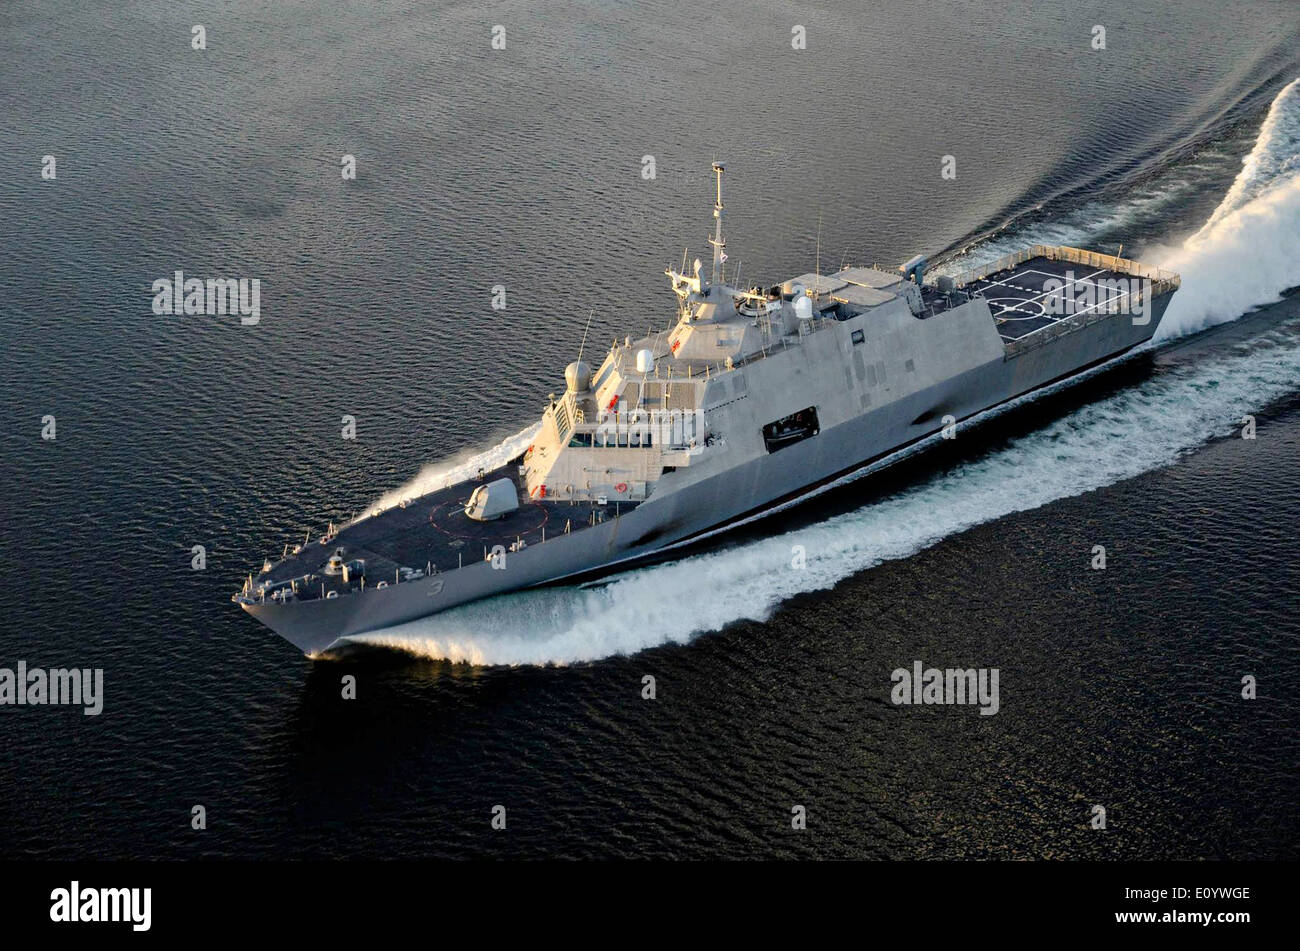 A US Navy littoral combat ship USS Fort Worth conducts builder's trials in Lake Michigan October 5, 2011 near Marinette, Wisconsin. Stock Photo